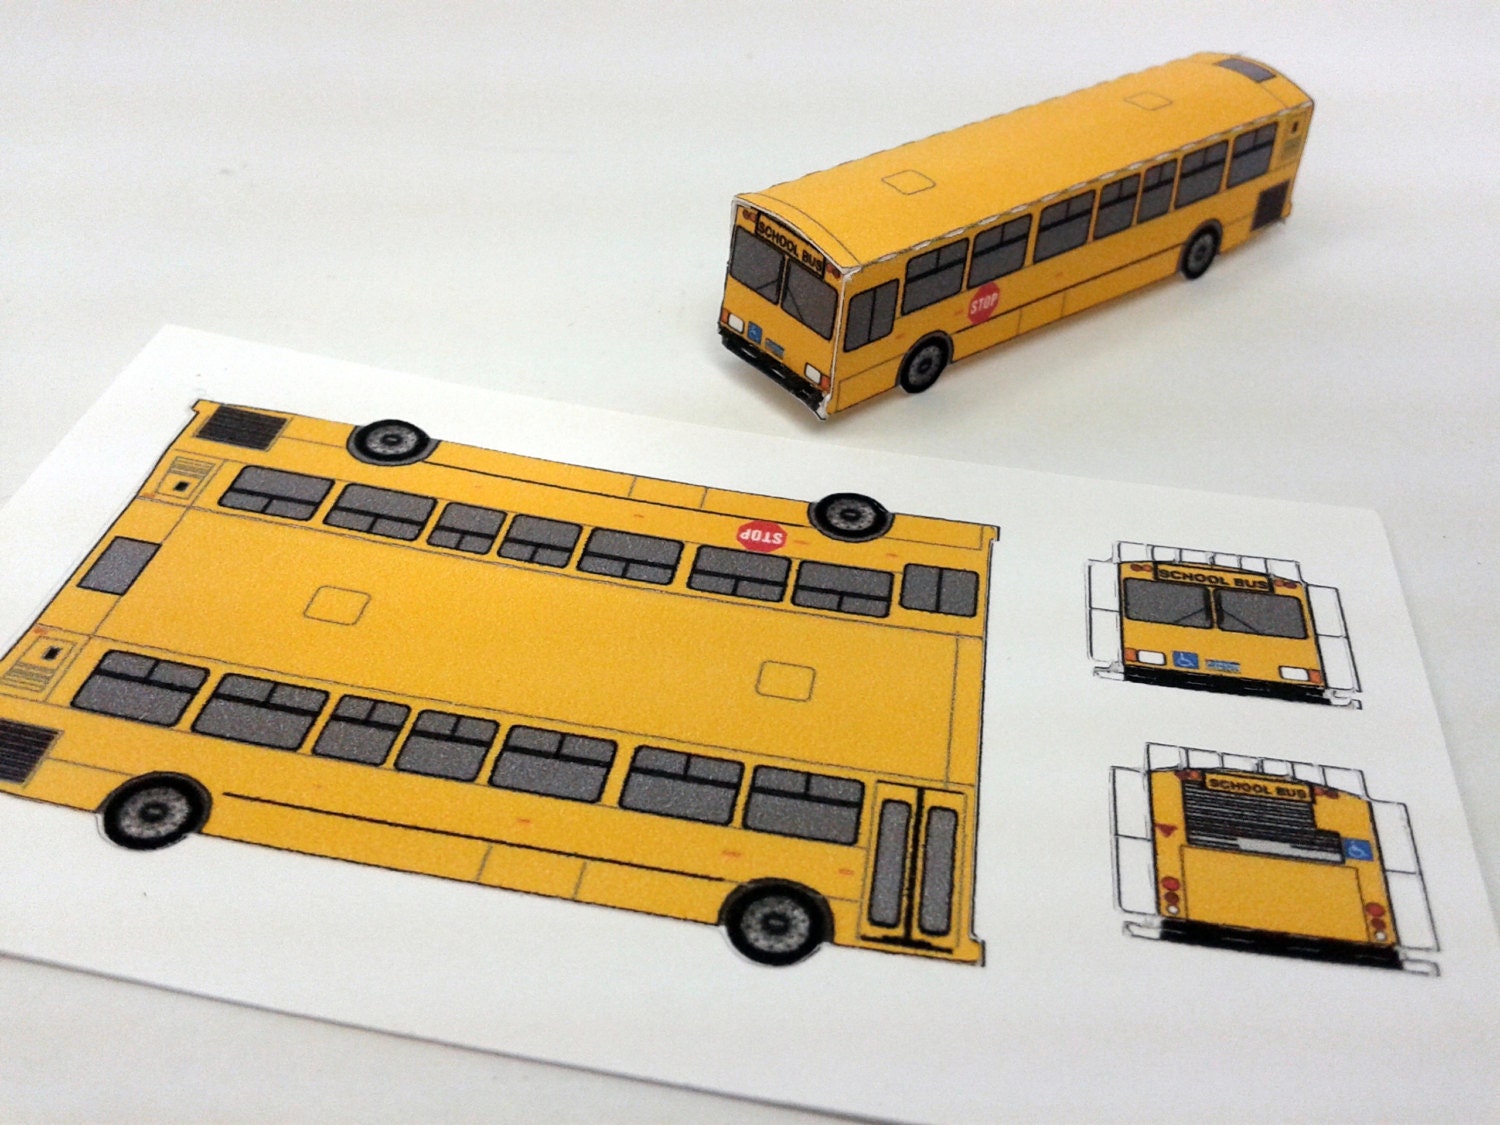 Miniature Bus Model for Display - China Toy and Bus Model price